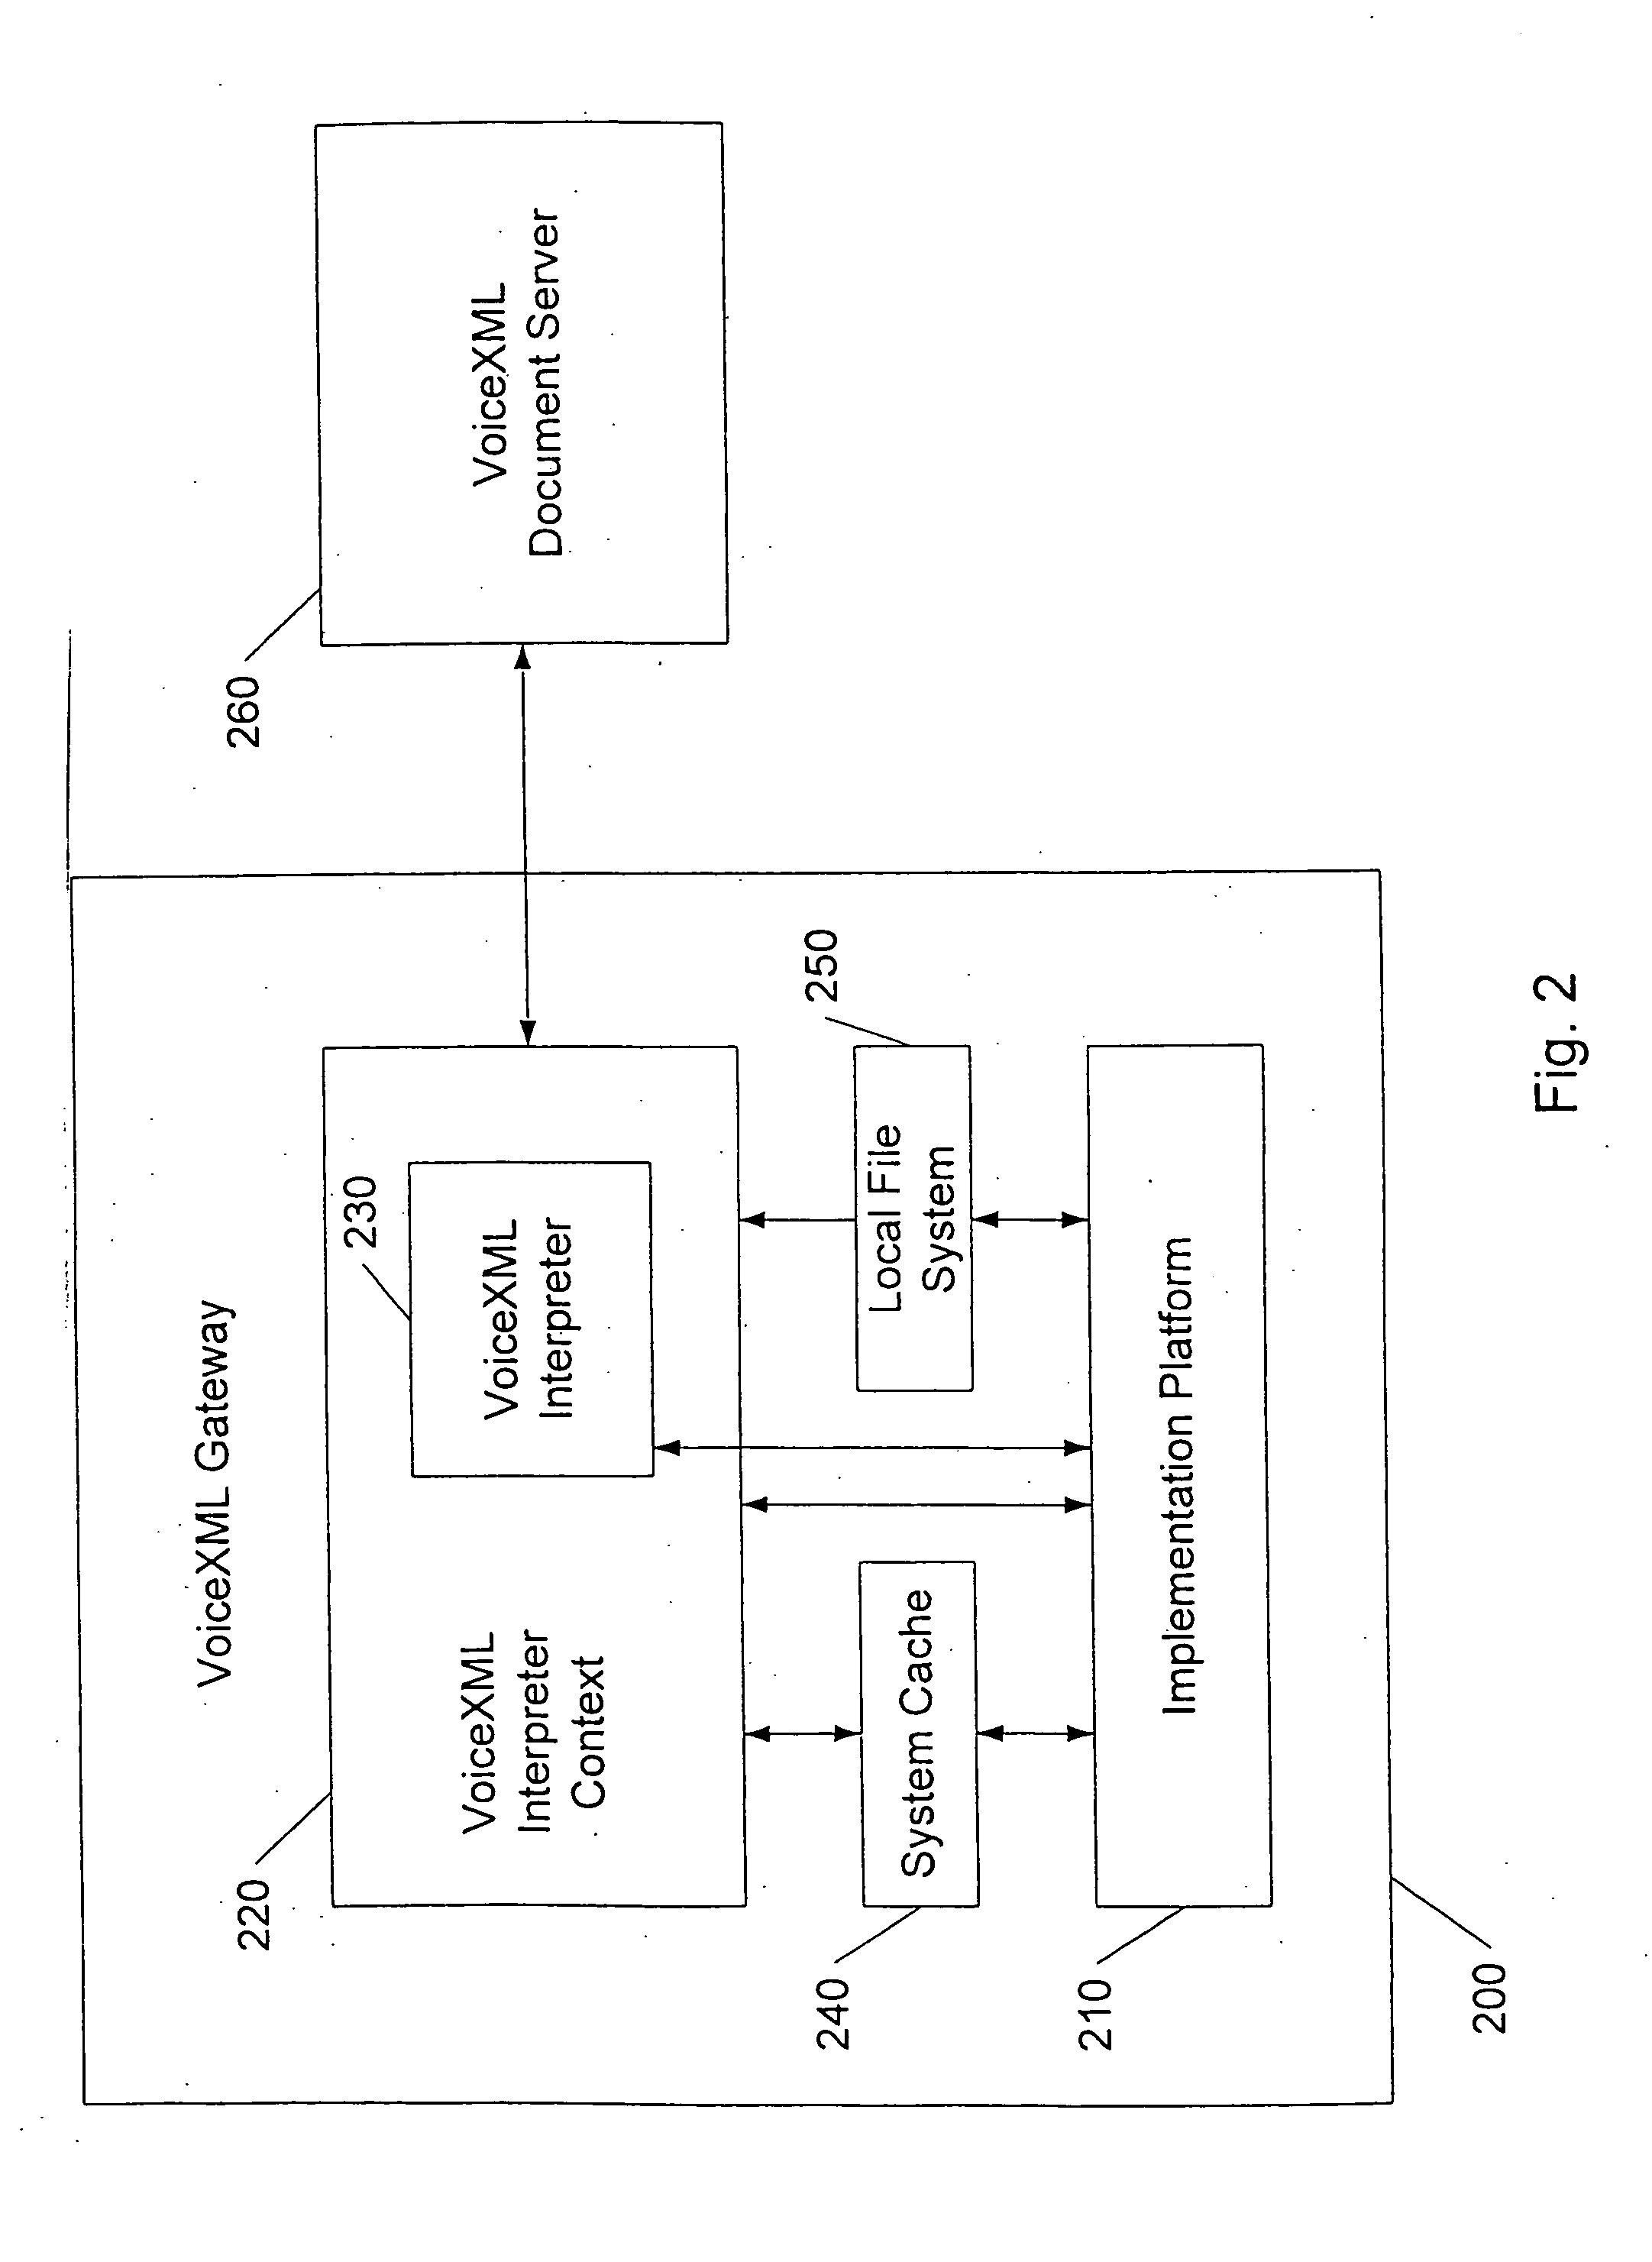 System and method for enhancing performance of VoiceXML gateways